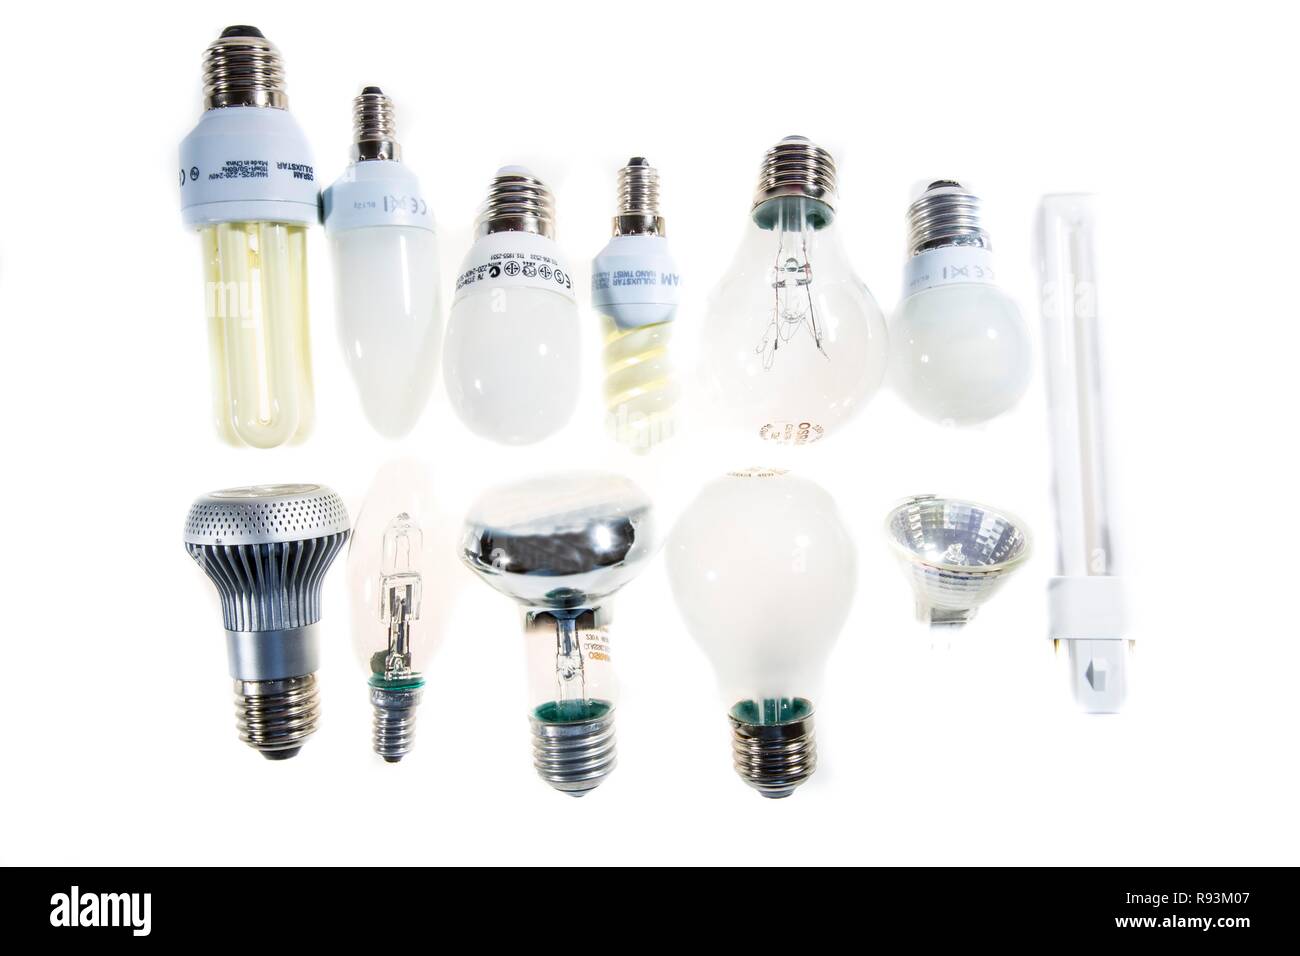 Various lamps, light bulbs, energy saving lamps and LED lamps Stock Photo